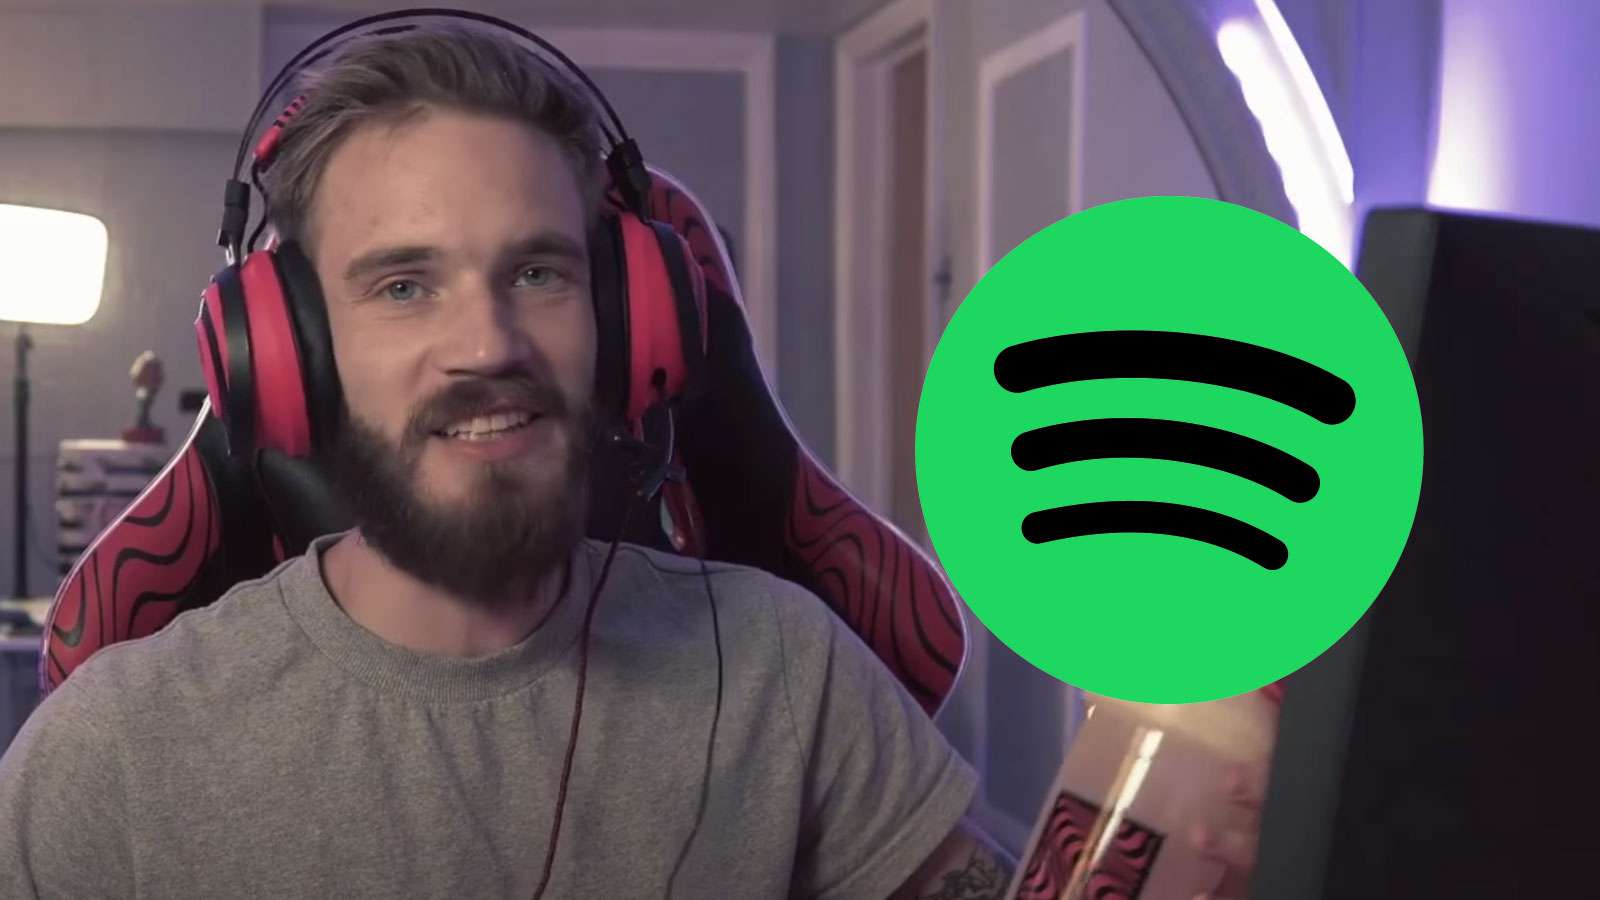 PewDiePie talks to the camera beside the Spotify logo.